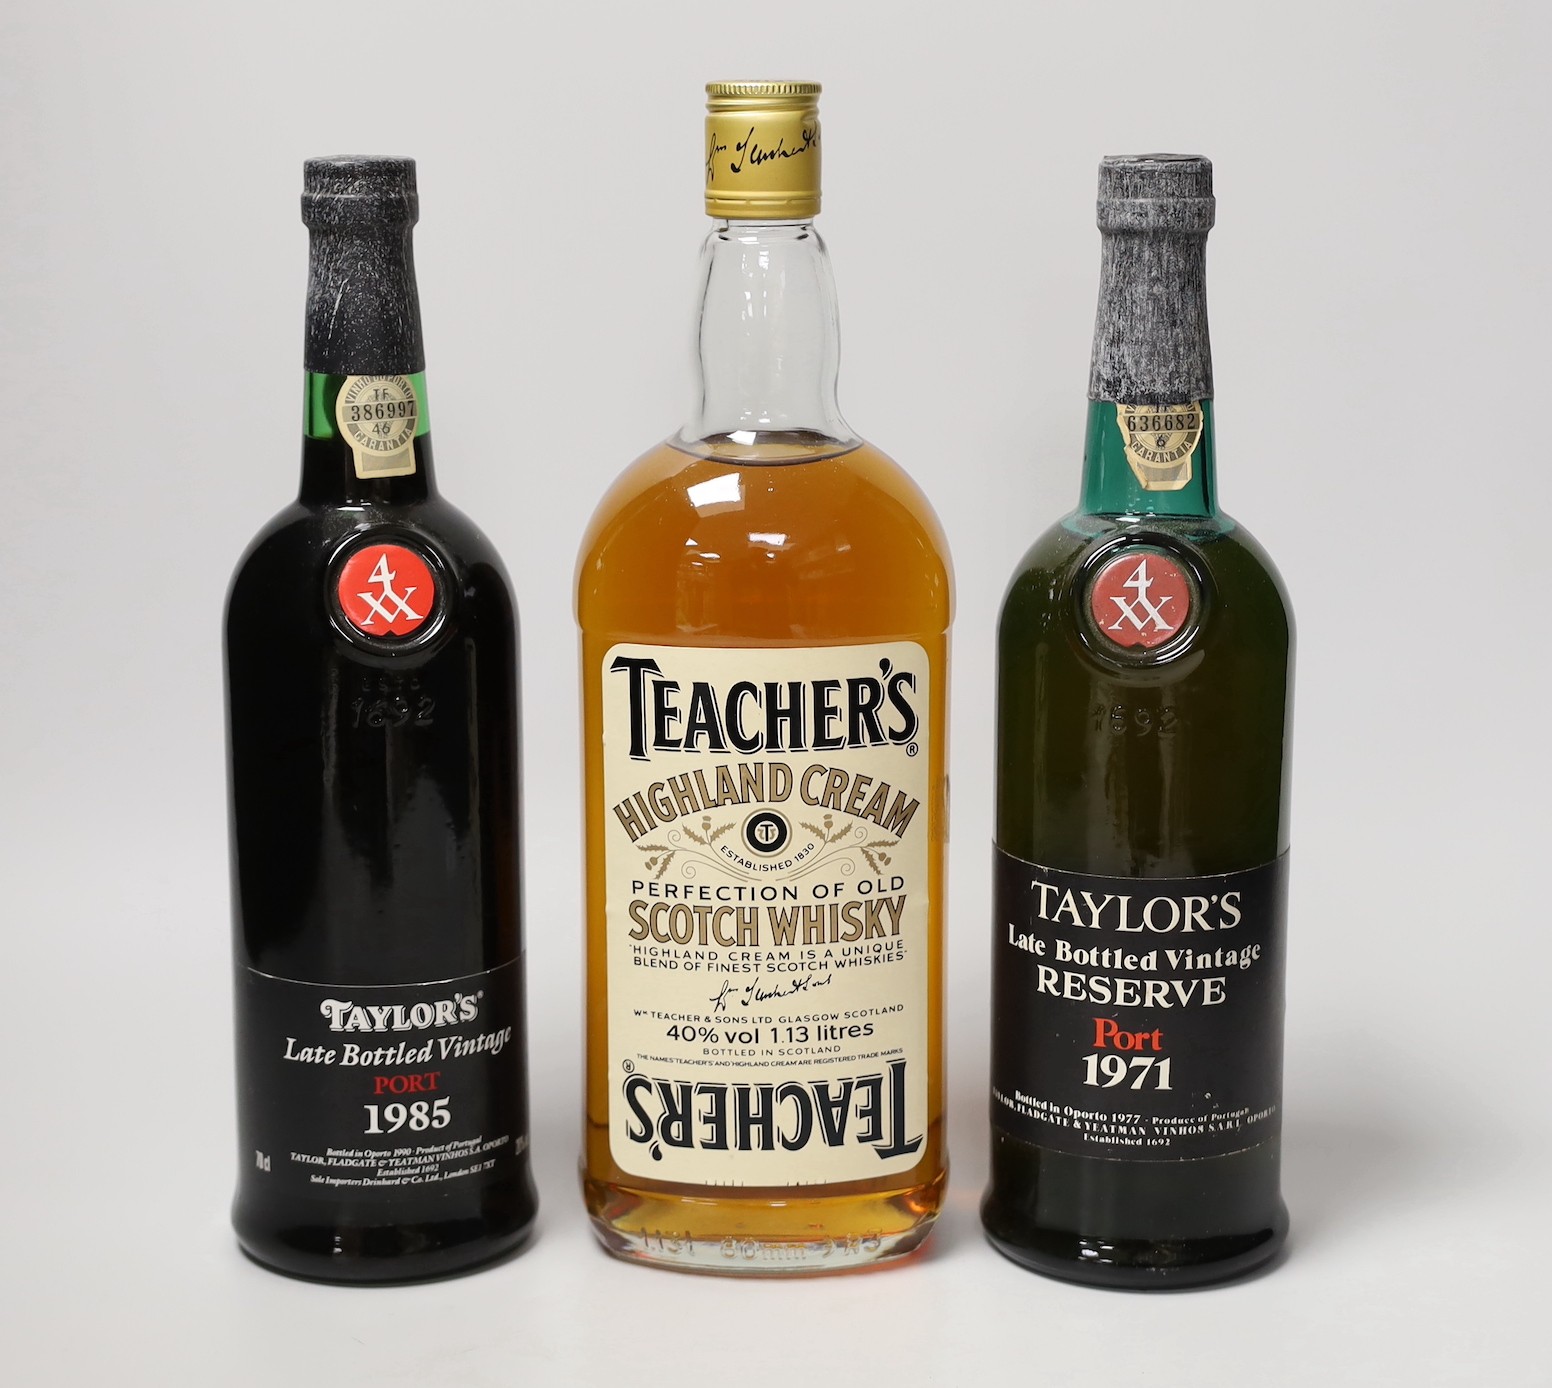 Two bottles of Taylor's Late Vintage Port 1971 and 1985 and a bottle of Teacher's whisky